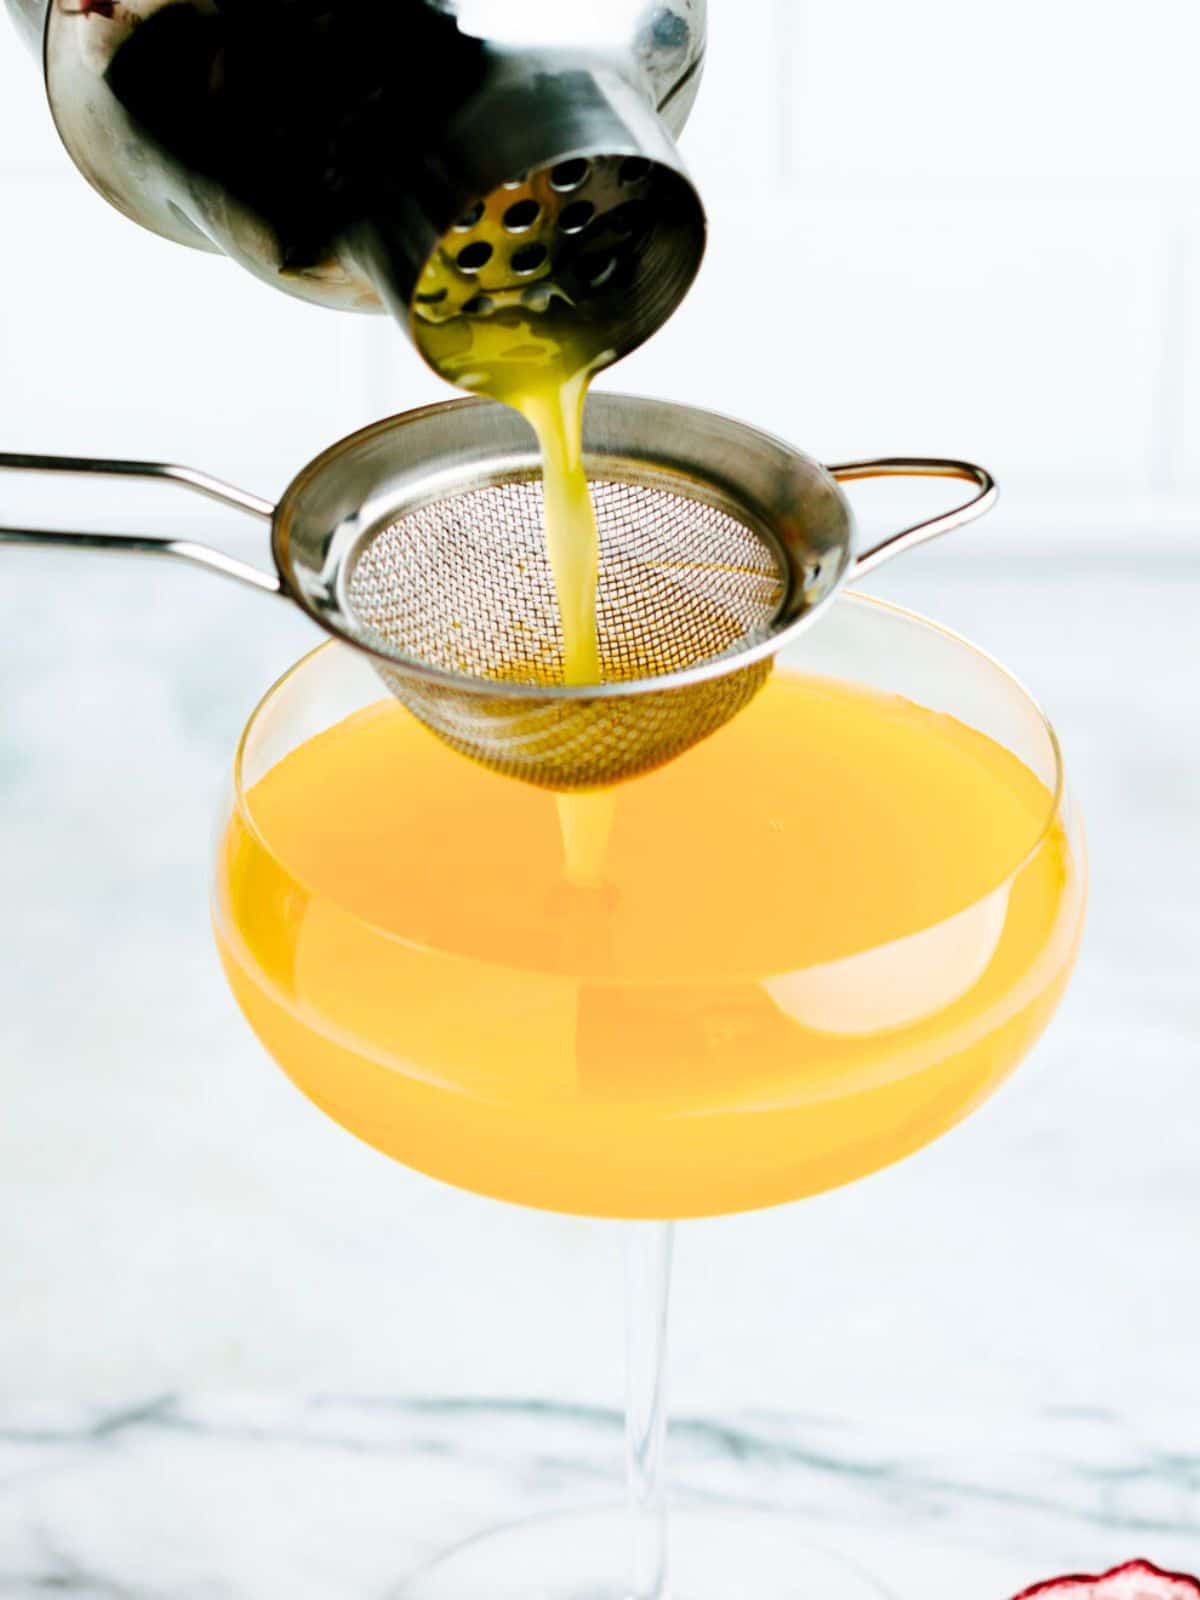 A passion fruit martini being poured from a cocktail shaker into a martini glass.